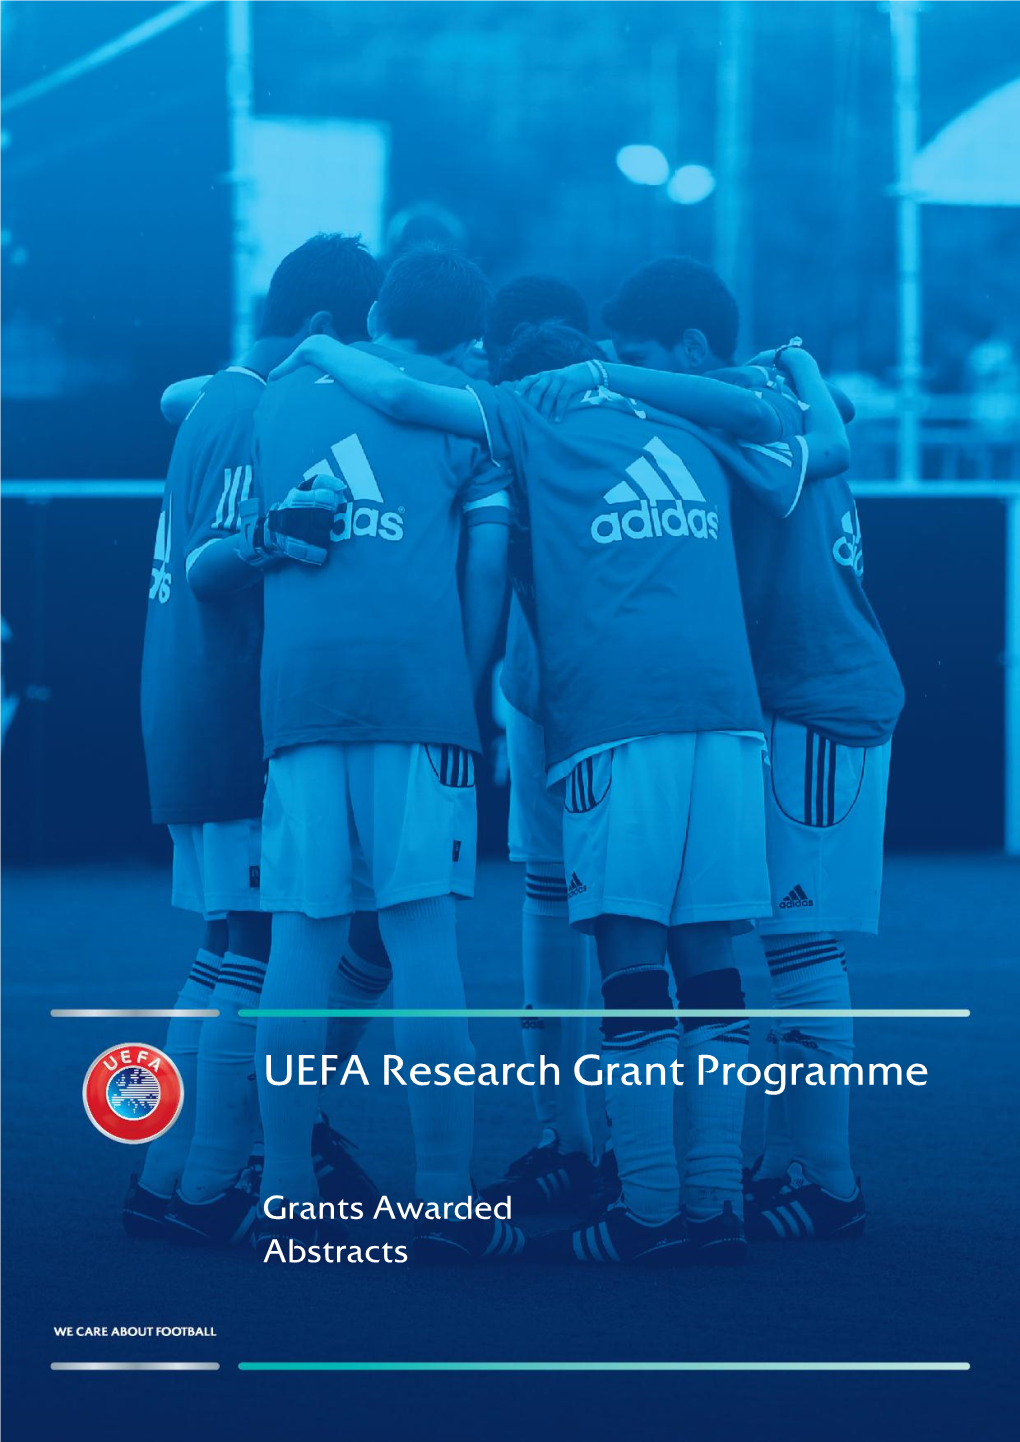 UEFA Research Grant Programme